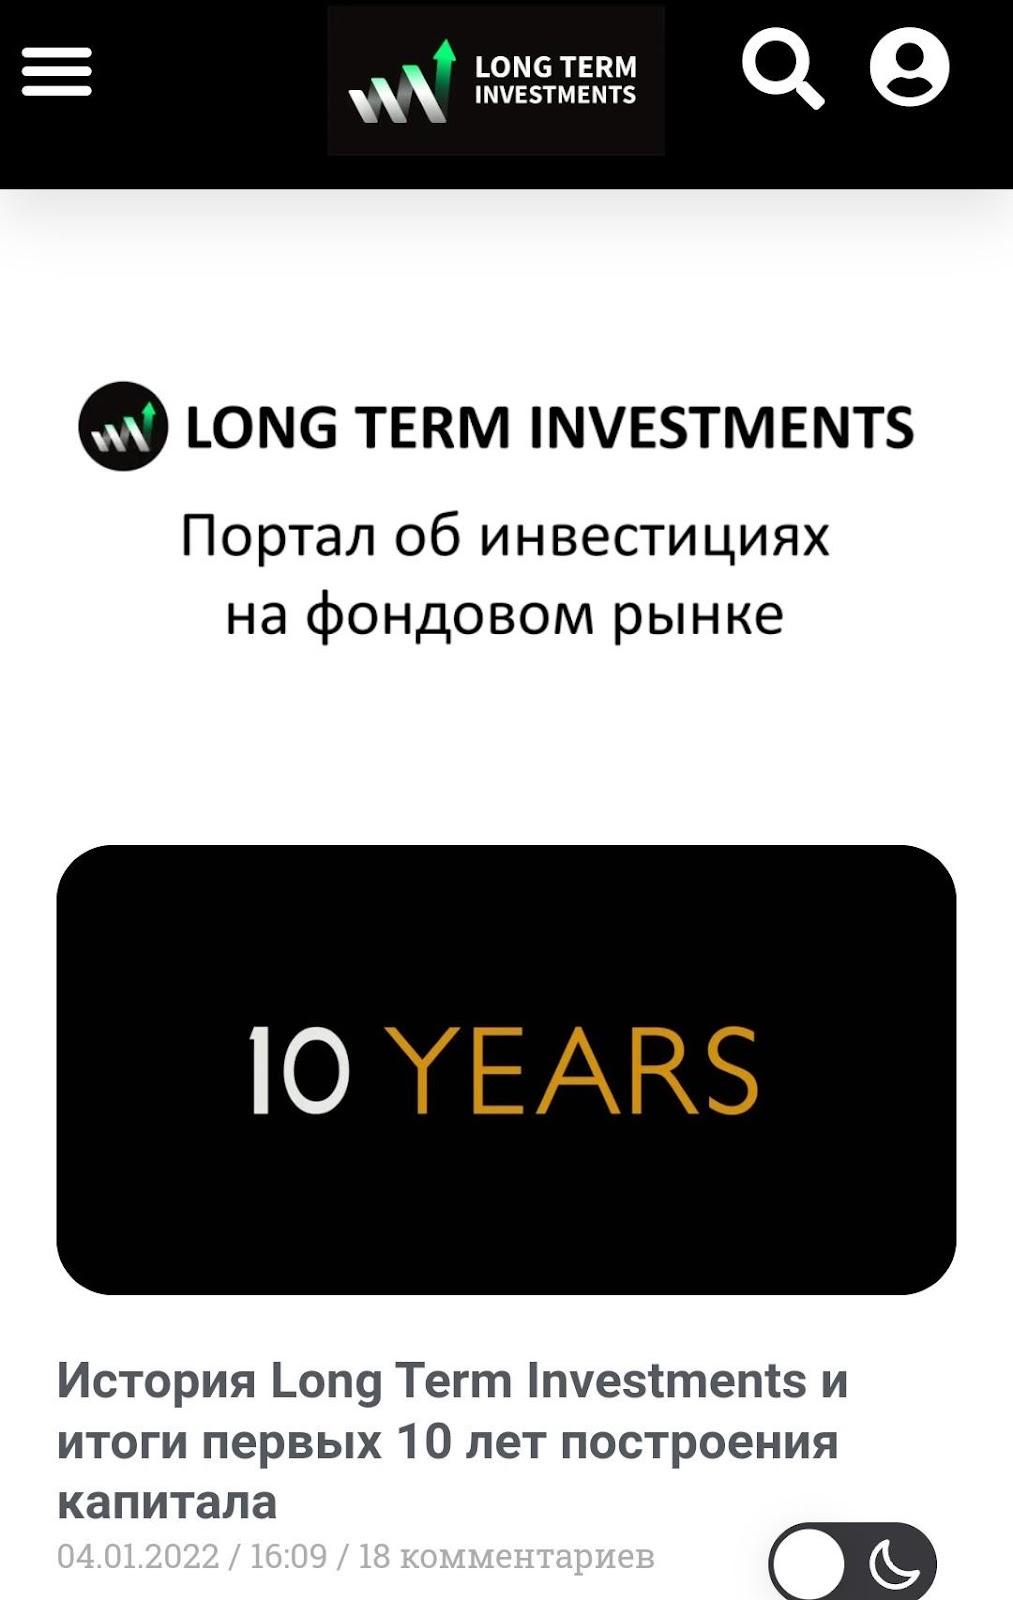 Long term investments - сайт